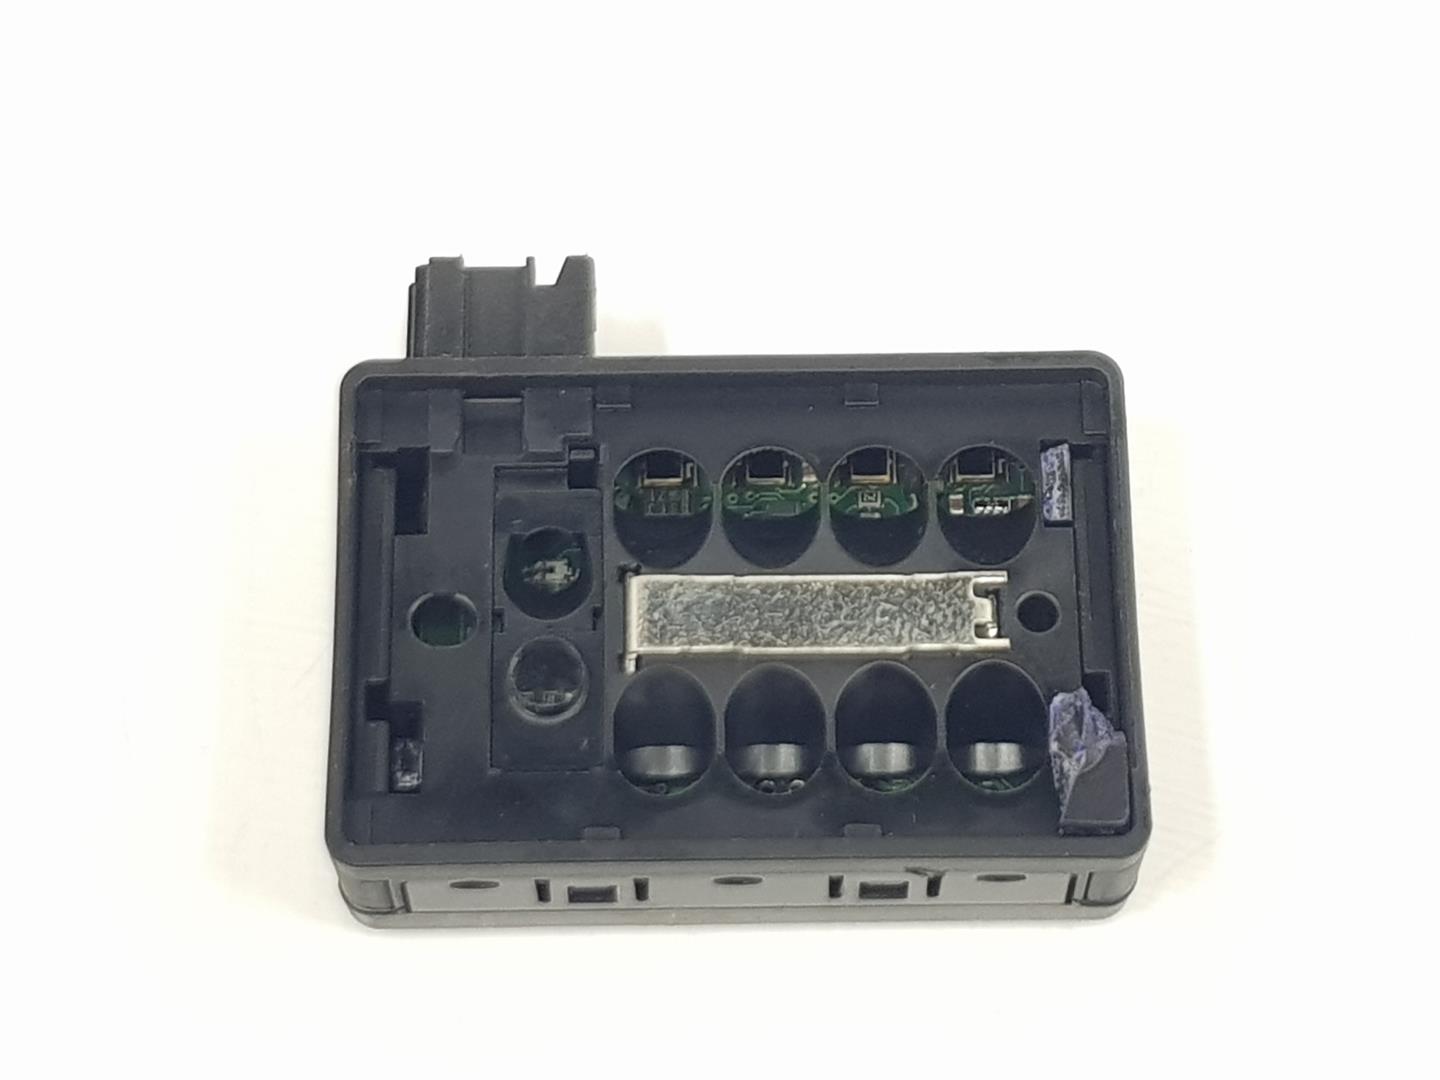 LAND ROVER Discovery 4 generation (2009-2016) Other Control Units YDB500290, 5H3217E695AA 19934987